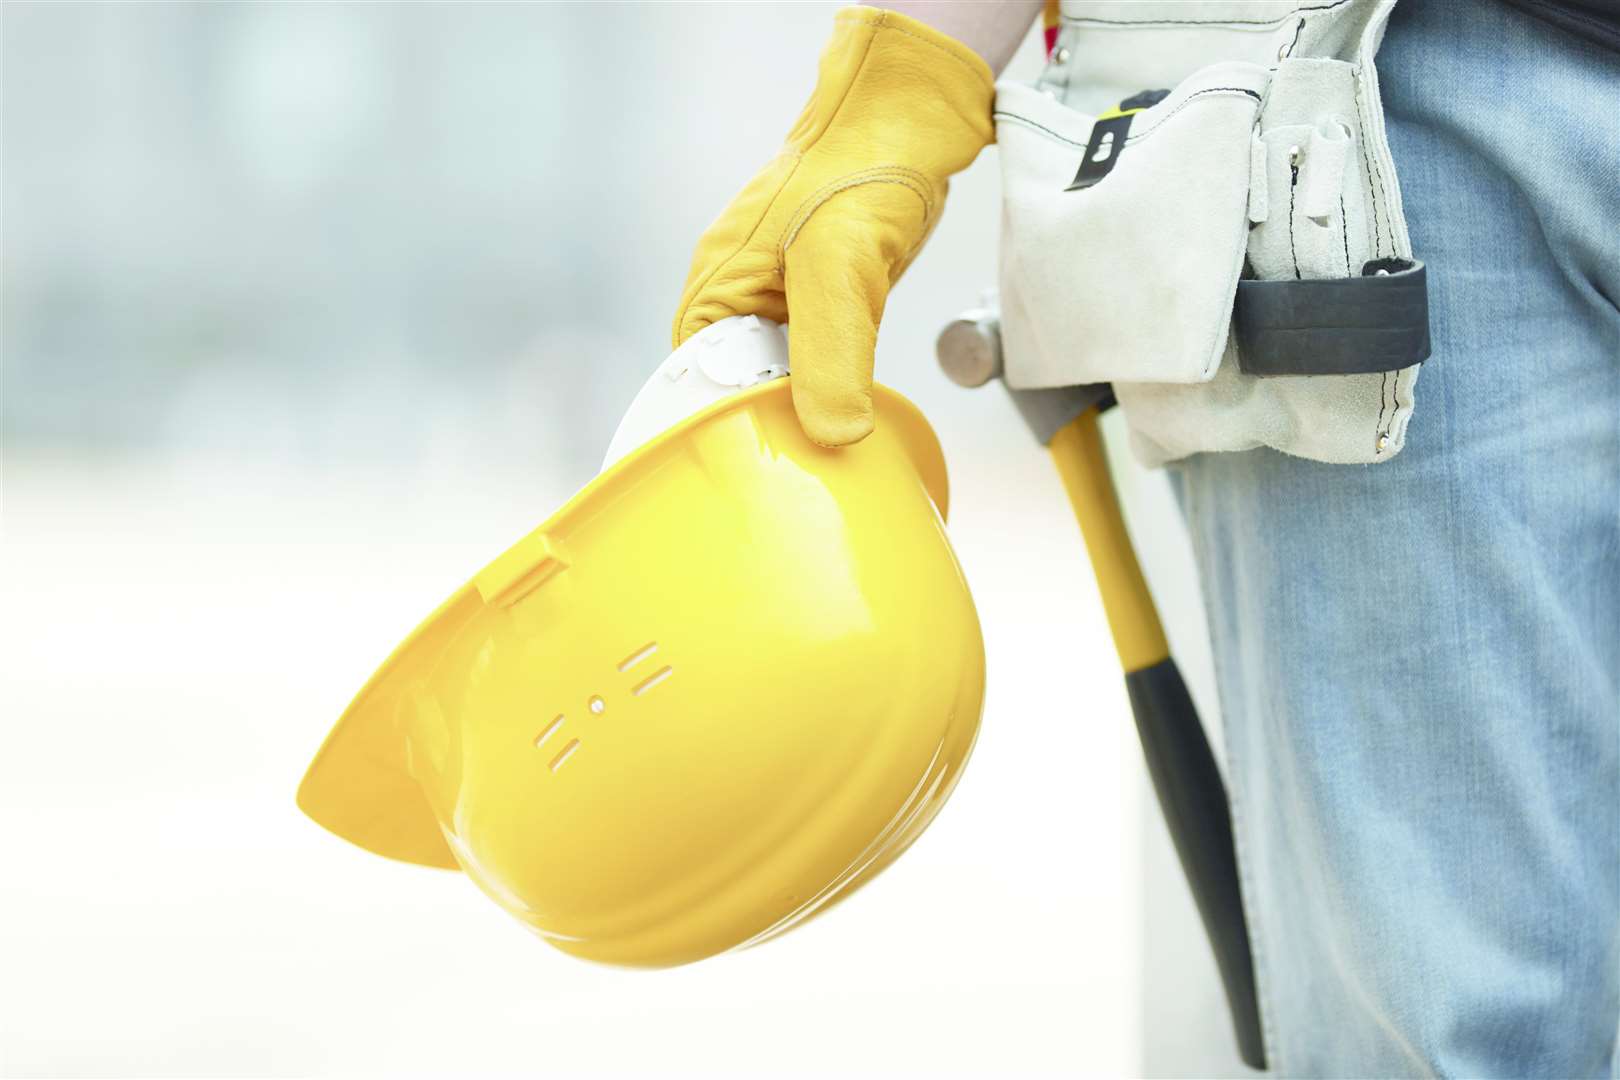 KMG USE ONLY .COPYRIGHT:Getty Images/iStockphoto.SUBMITTED BY: Thinkstock 0800 028 6268 .OBJECT NAME: CONSTRUCTION KB.CAPTION: Construction stock image.CATEGORY: Business.LOCATION: -.SUBMITTED BY: Thinkstock 0800 028 6268 FM2944568. (3554650)